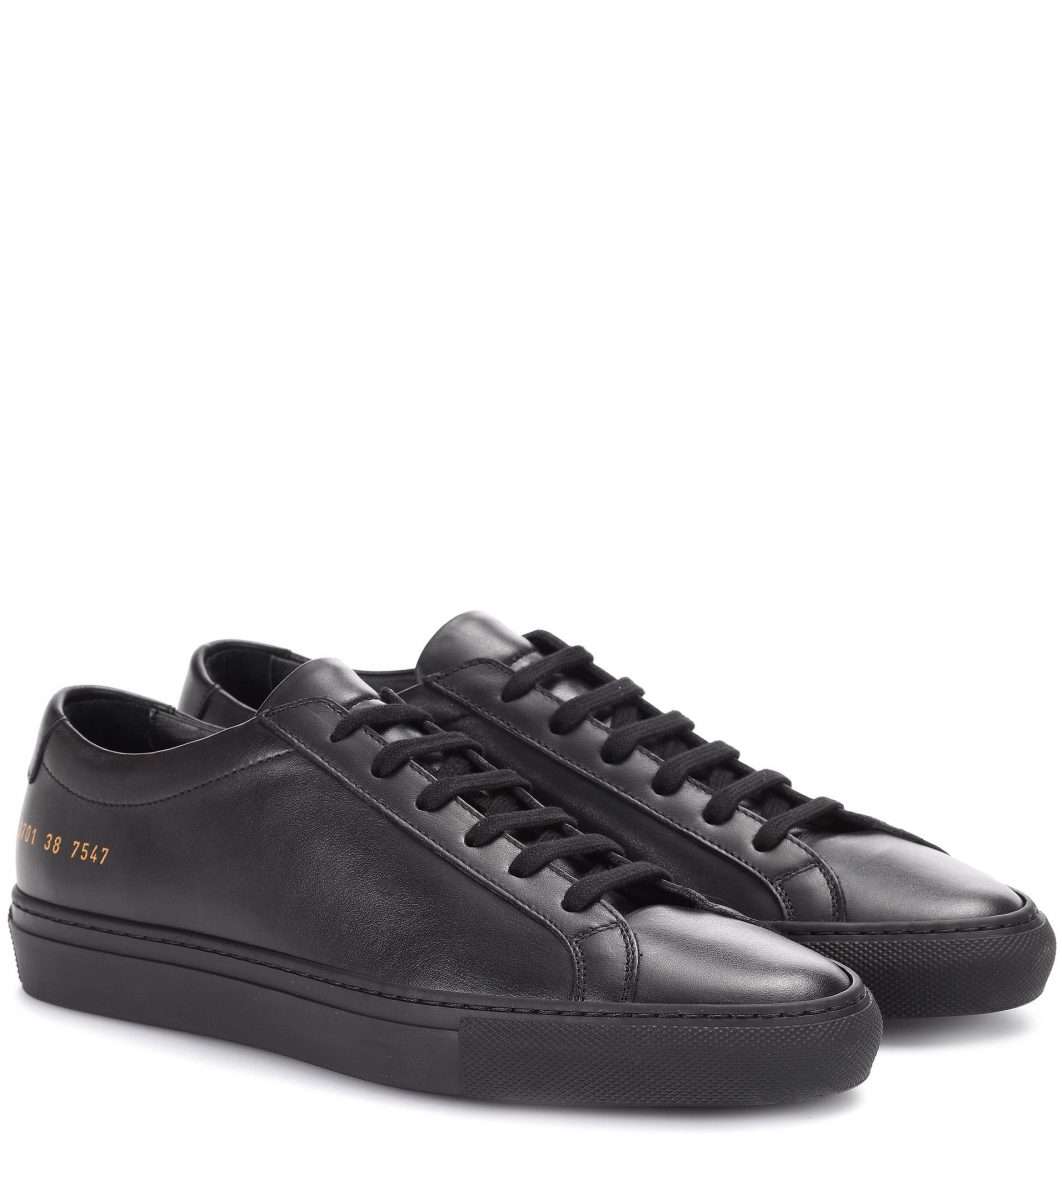 Common Projects Original Achilles Leather Sneakers in Black